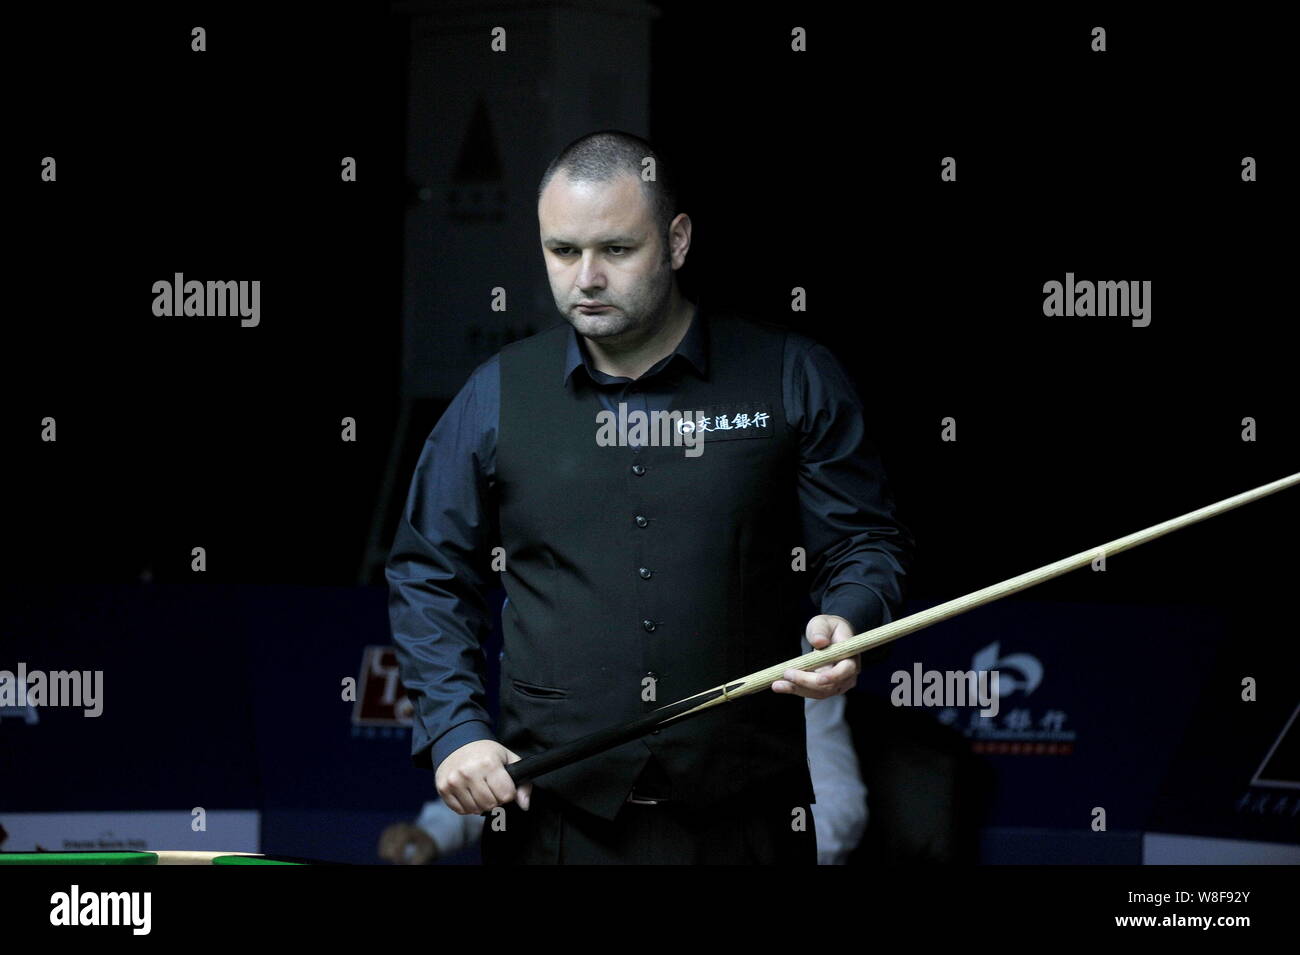 Stephen Maguire of England considers a shot against Michael Holt of England during their first round match of the 2015 World Snooker Shanghai Masters Stock Photo